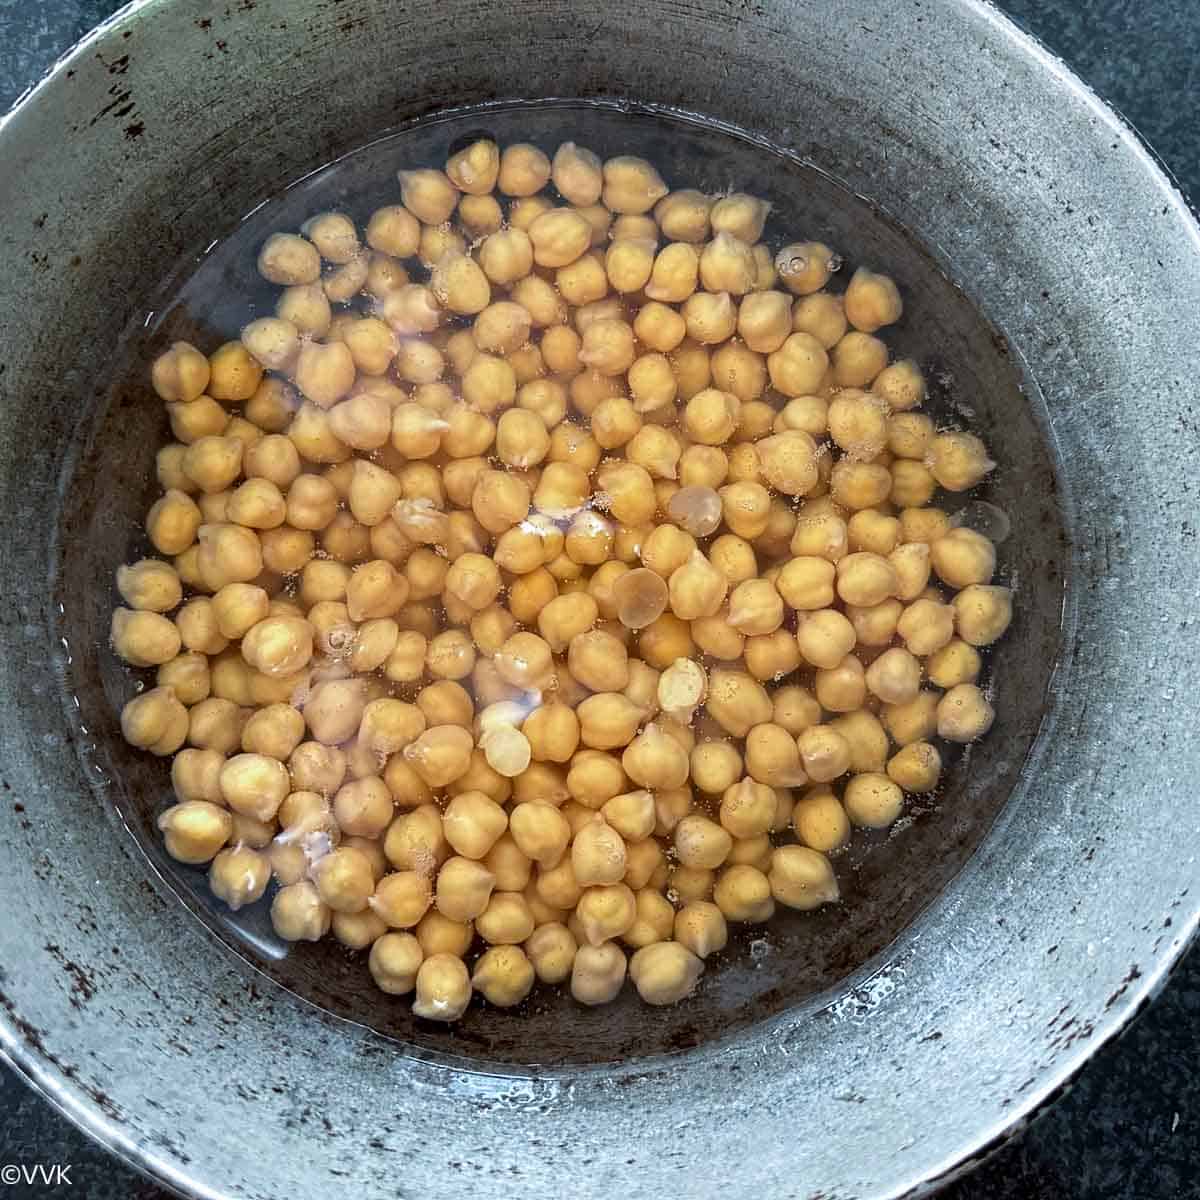 soaking the chickpeas